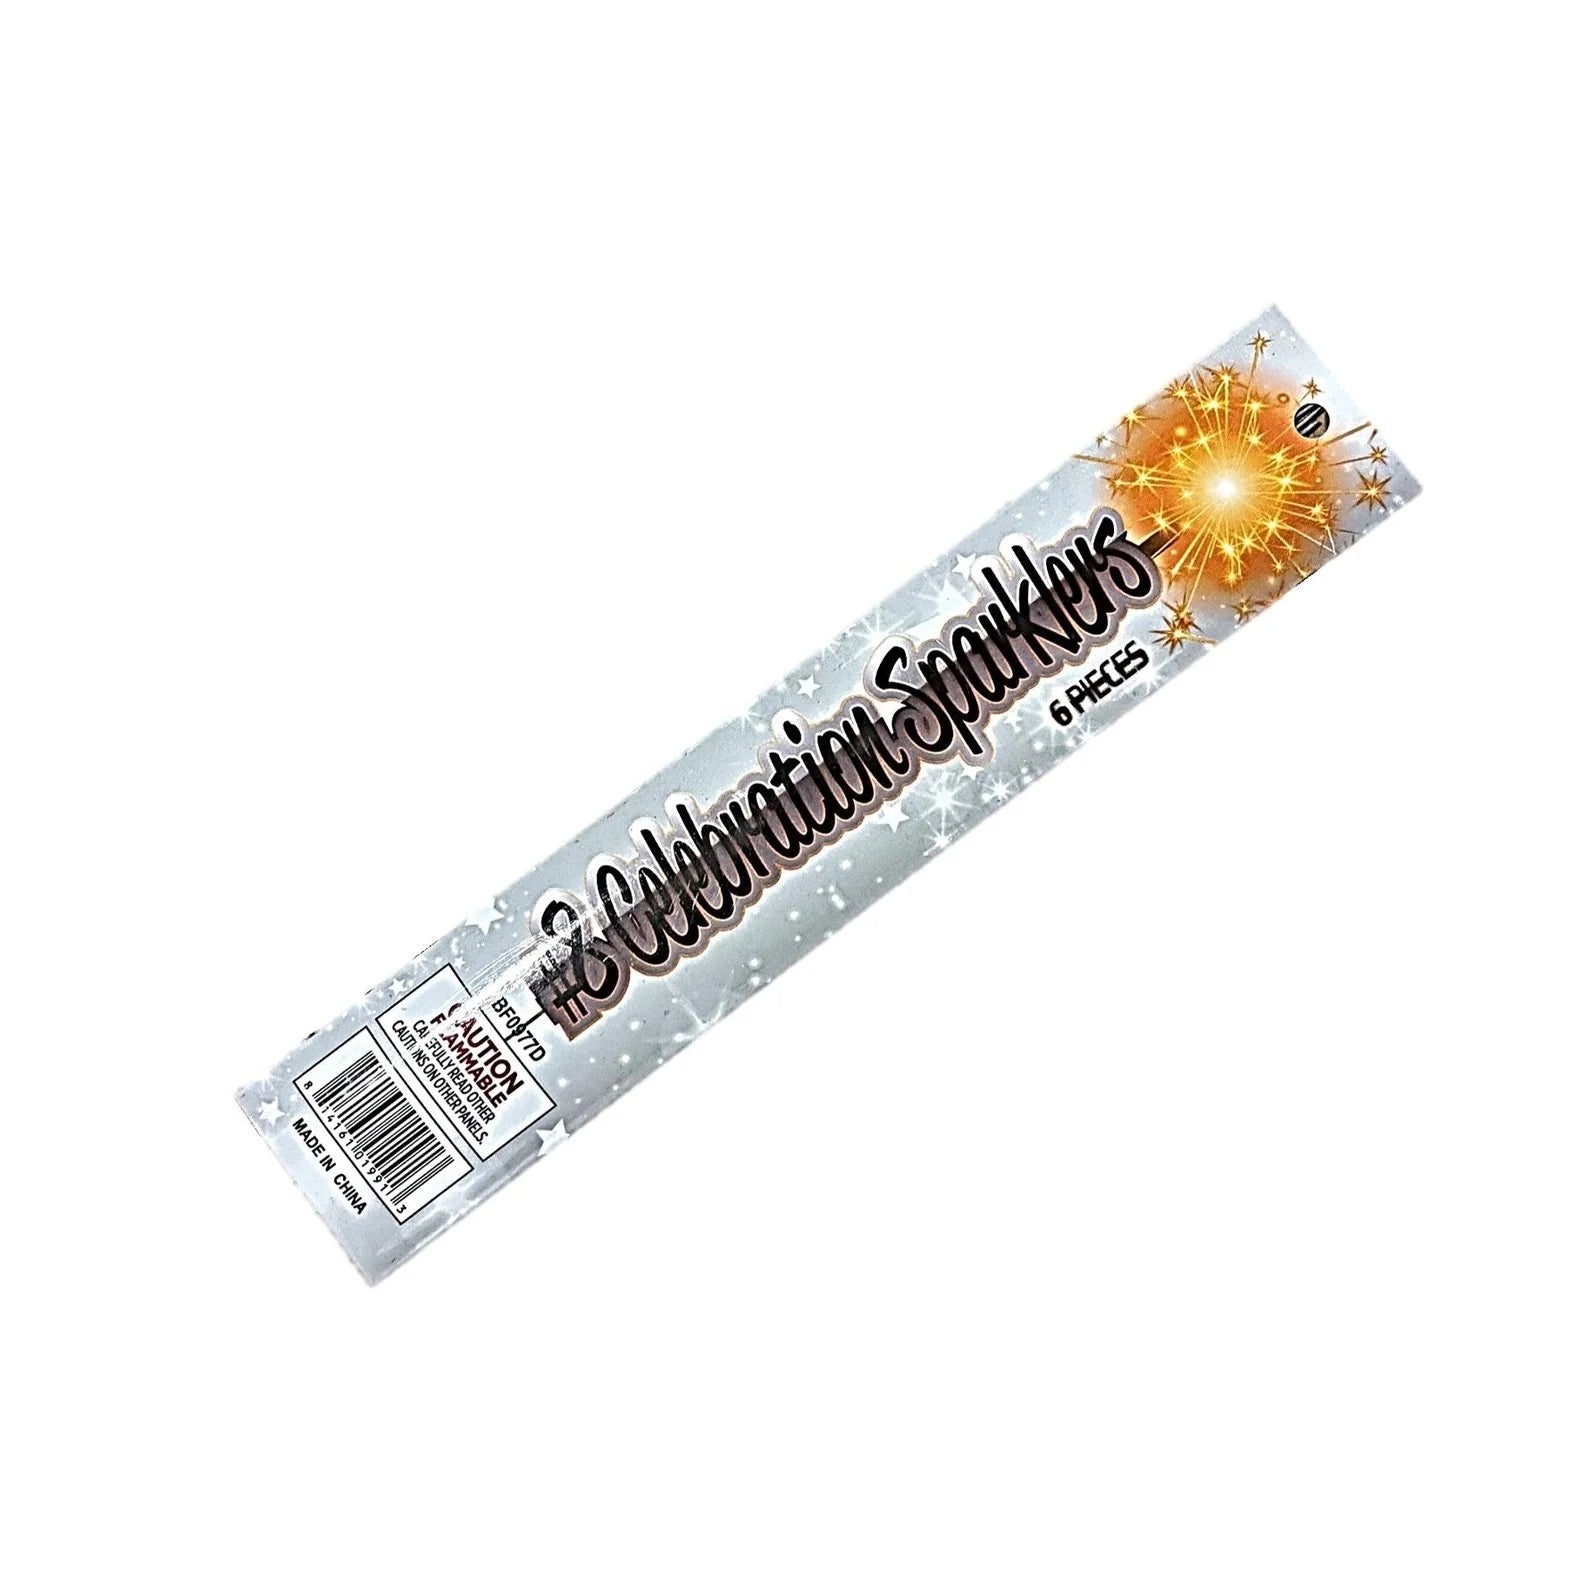 150 Piece 8 Inch Gold Sparklers - 25 Packs of 6 Sparklers